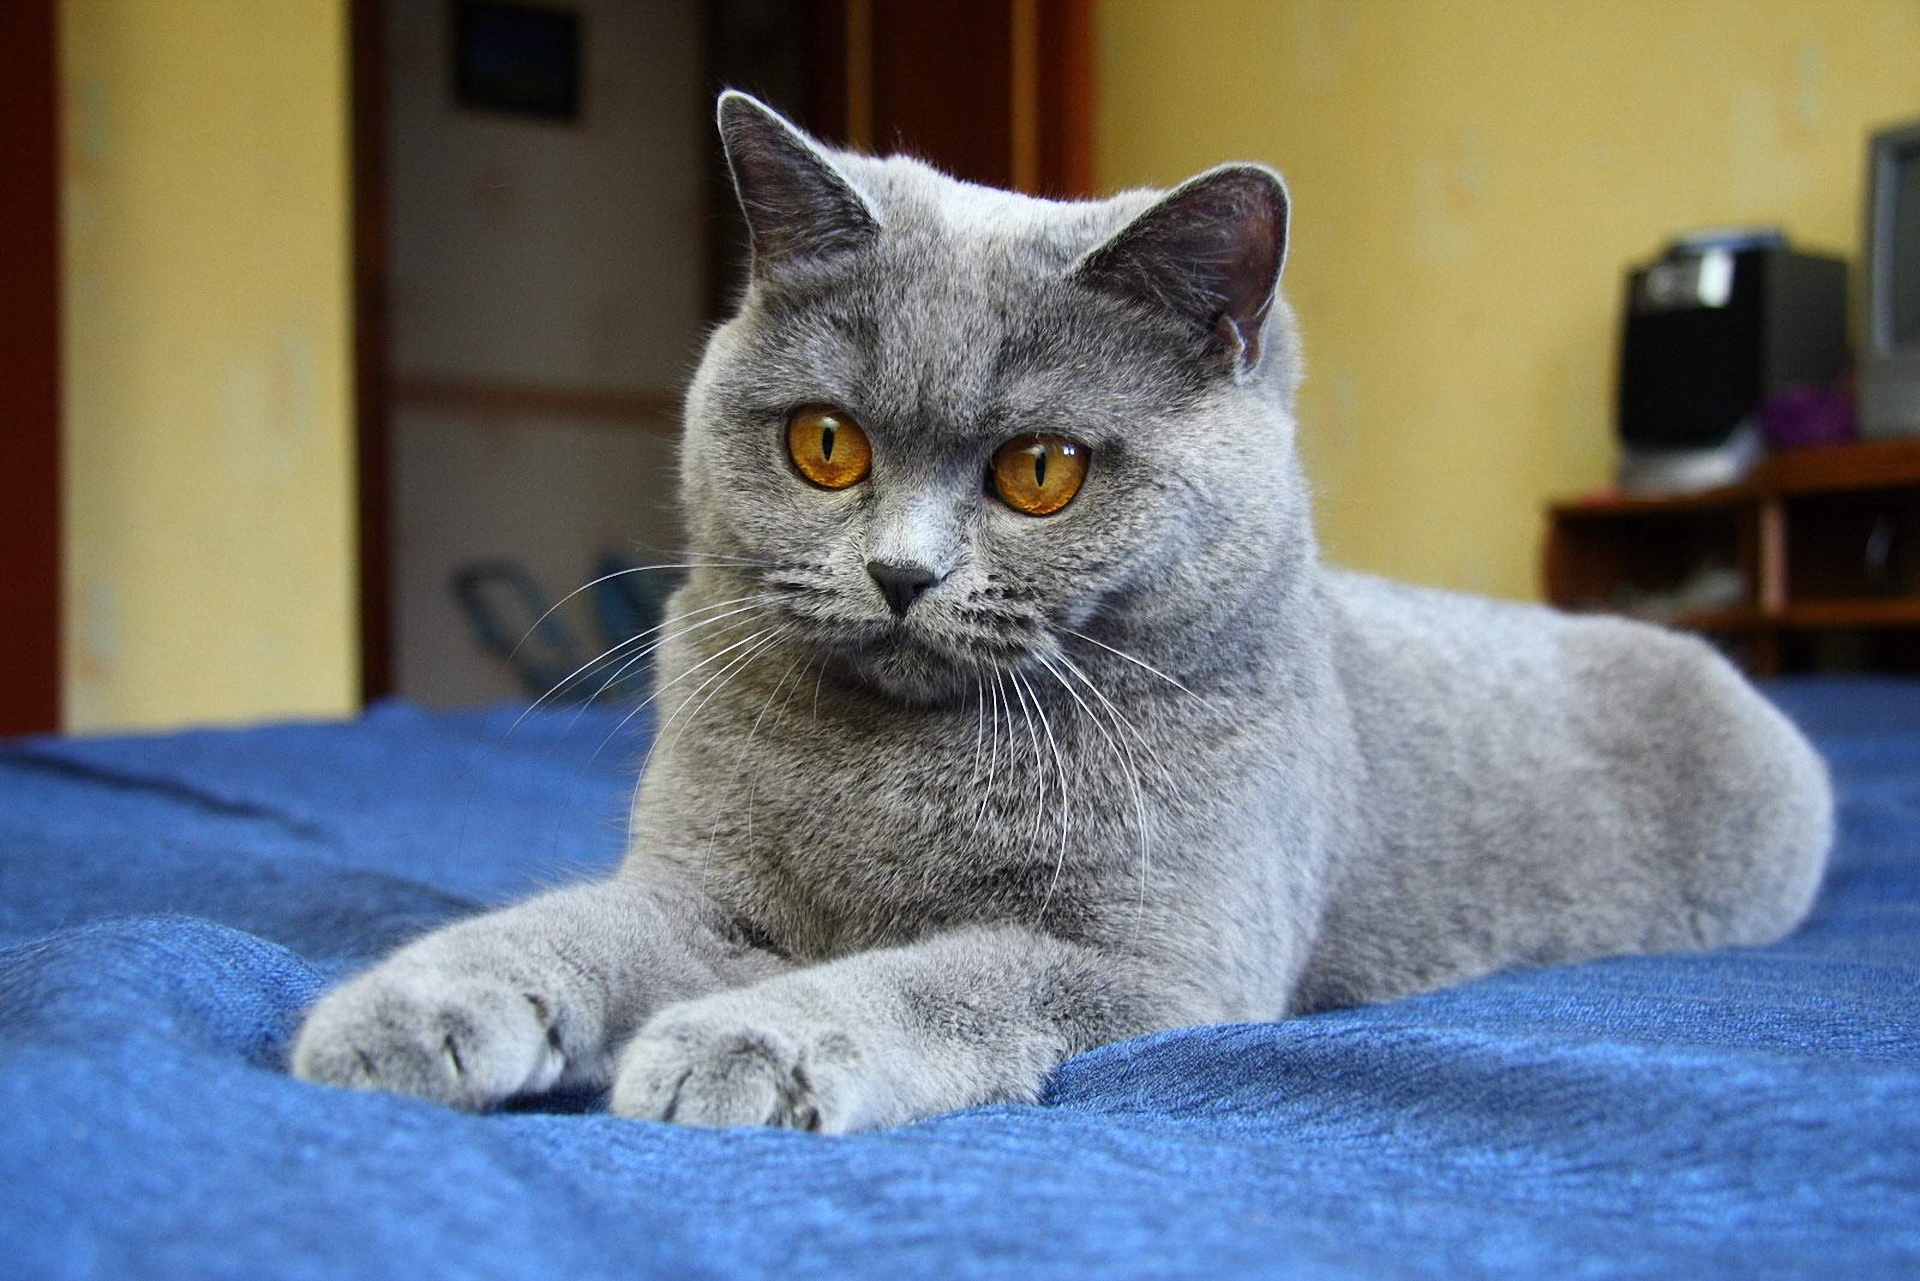 Young handsome British Shorthair cat wallpapers and images - wallpapers